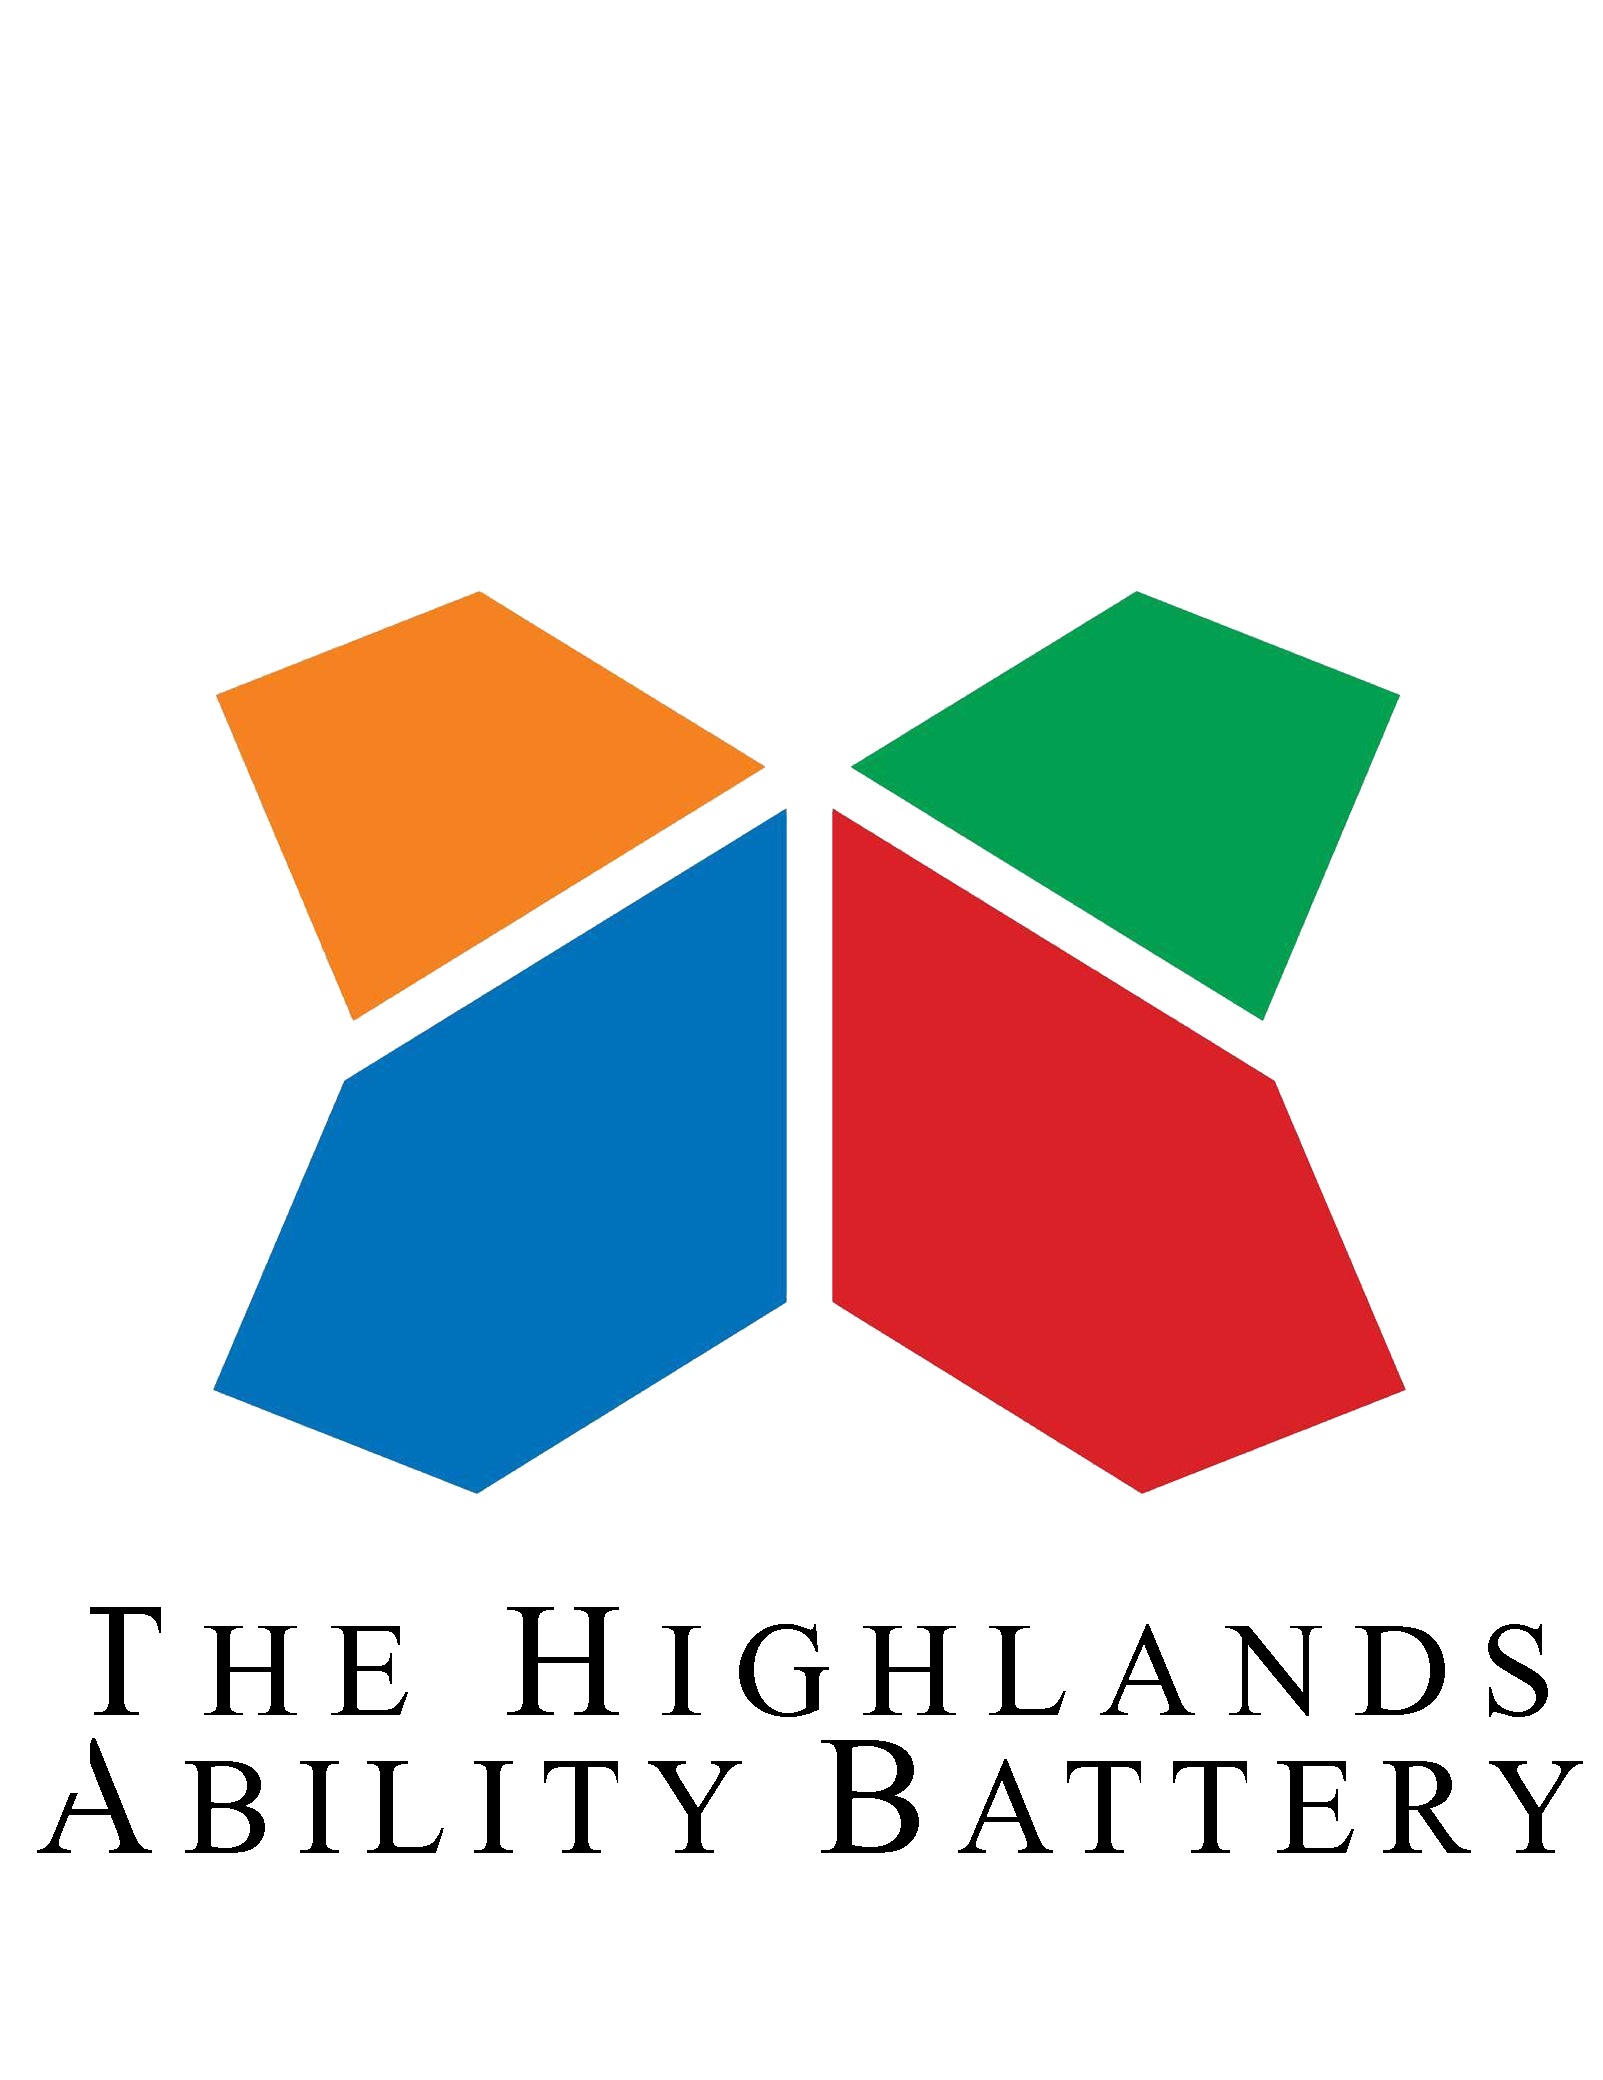 The Highlands Ability Battery career tests